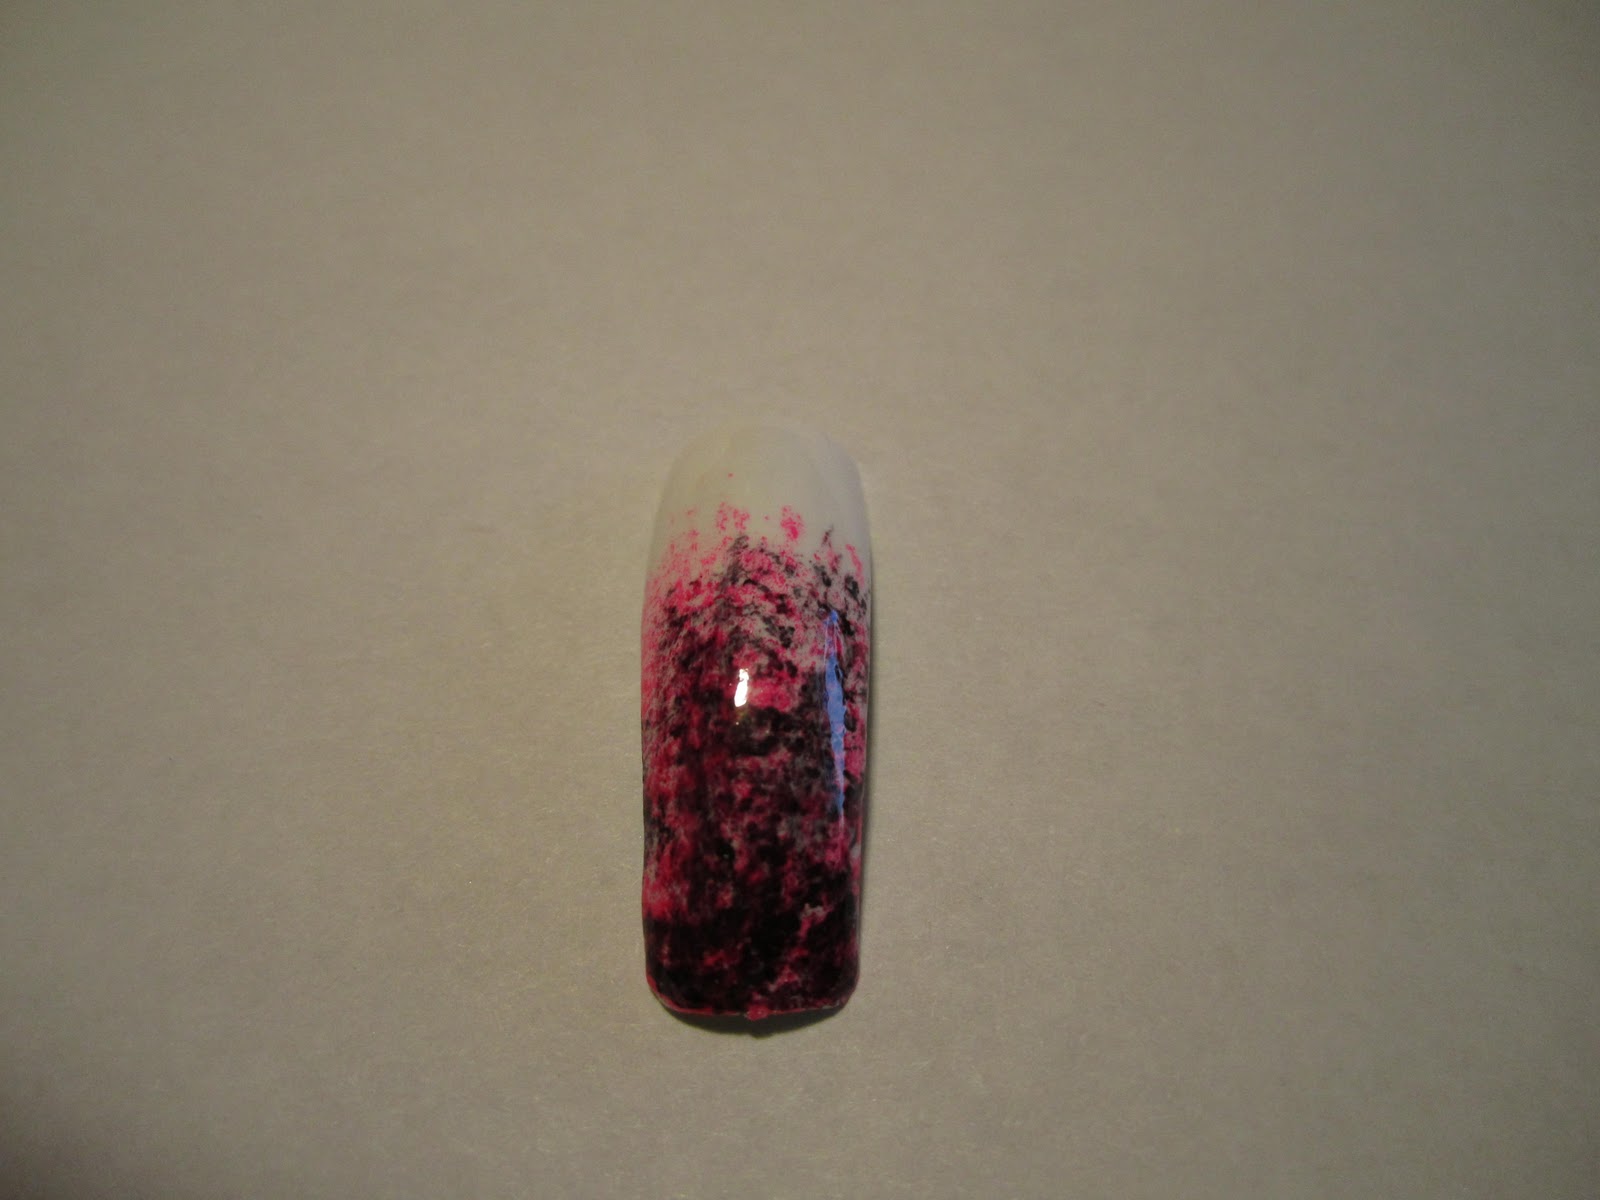 3. Marble Nail Art Design with Sponge - wide 8